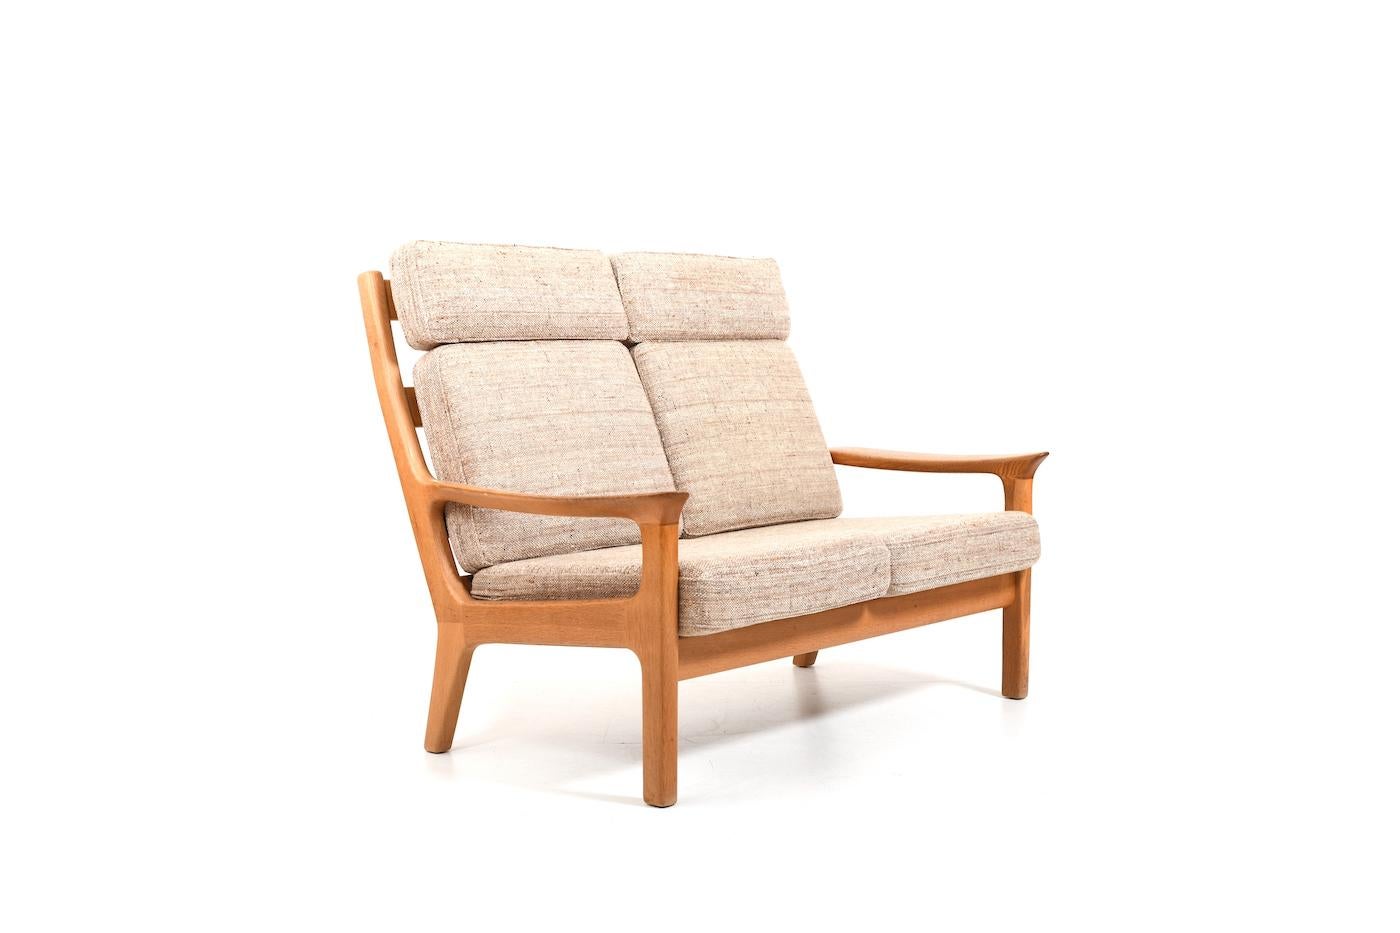 High back sofa set 3-2-1 by Jens-Juul Kristensen for JK Denmark. Made in solid oak. Set consisting of a 3 seater sofa, 2 seater sofa and a lounge chair incl. ottoman. With orig. cushion in creme wool fabric. Denmark, early 1970s. Price for the whole